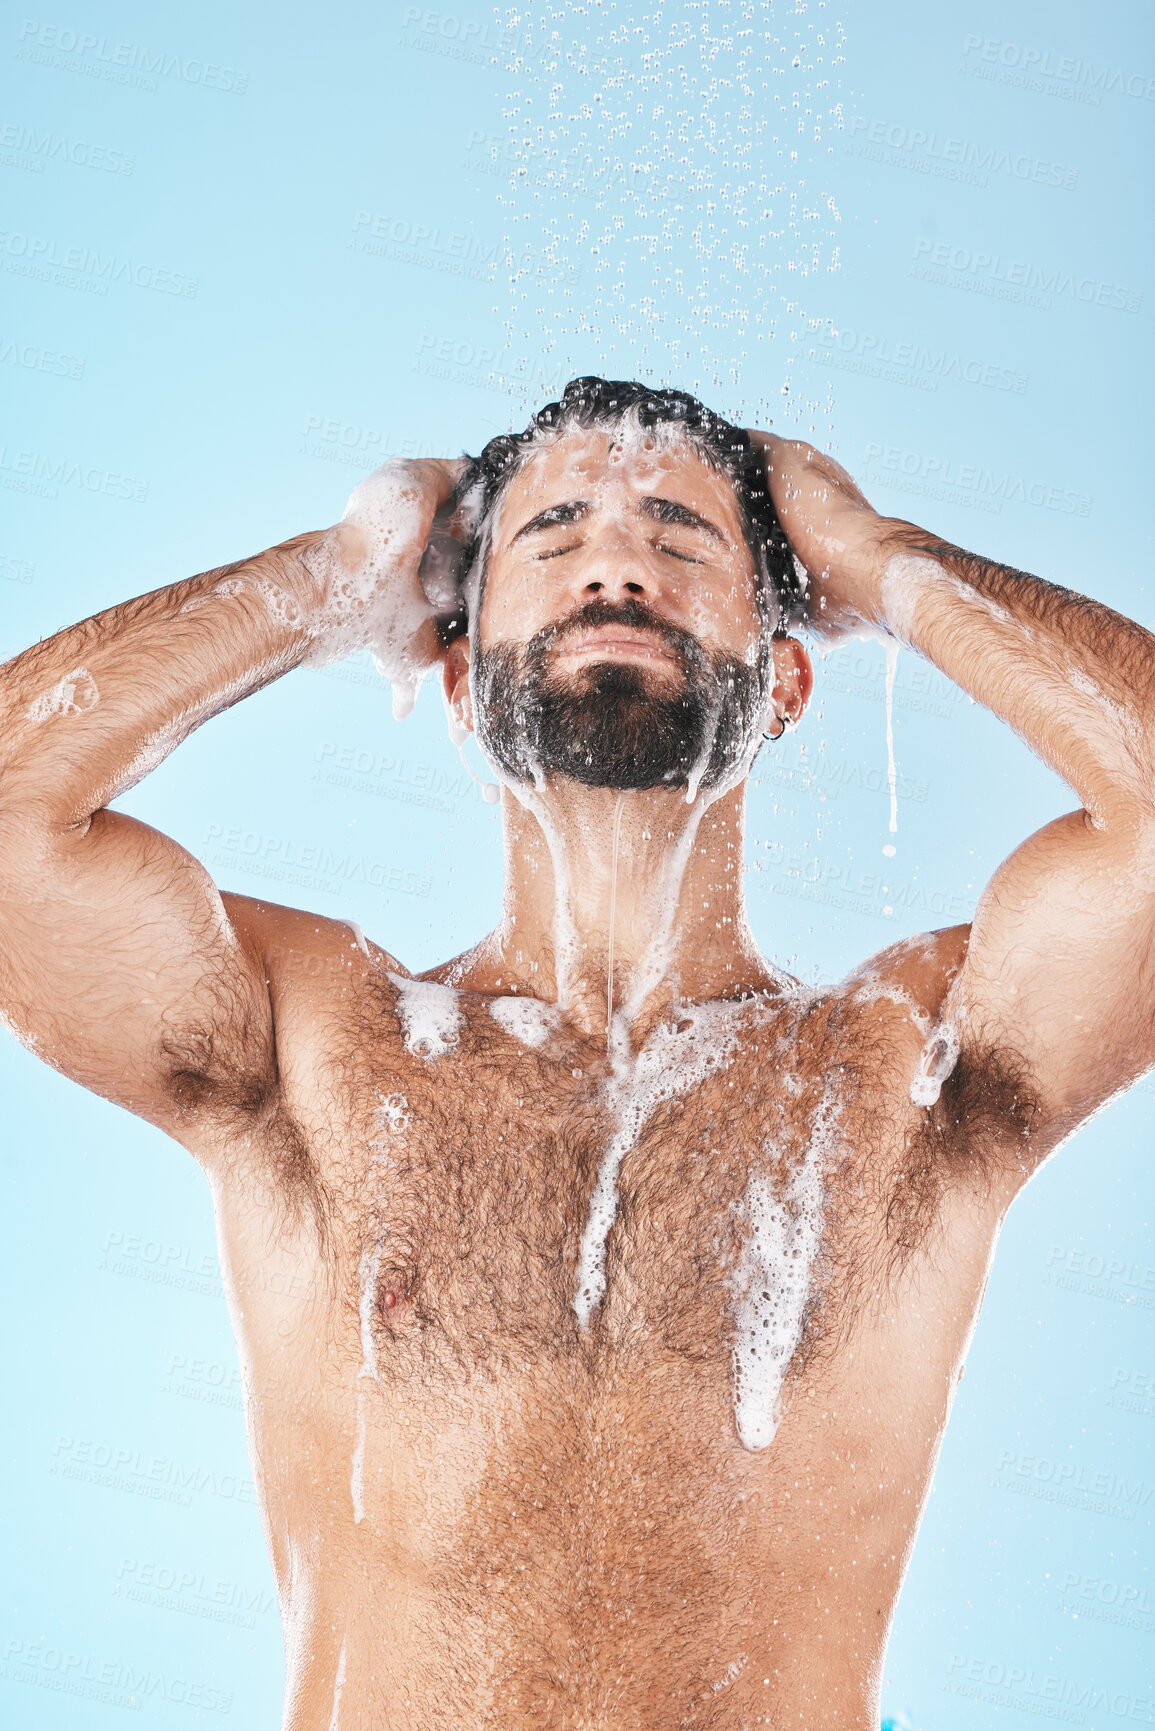 Buy stock photo Soap, water or man in shower cleaning skin, washing face or body in healthy morning grooming routine in studio. Blue background, relaxing or male model with self care, self love or foam for hair care